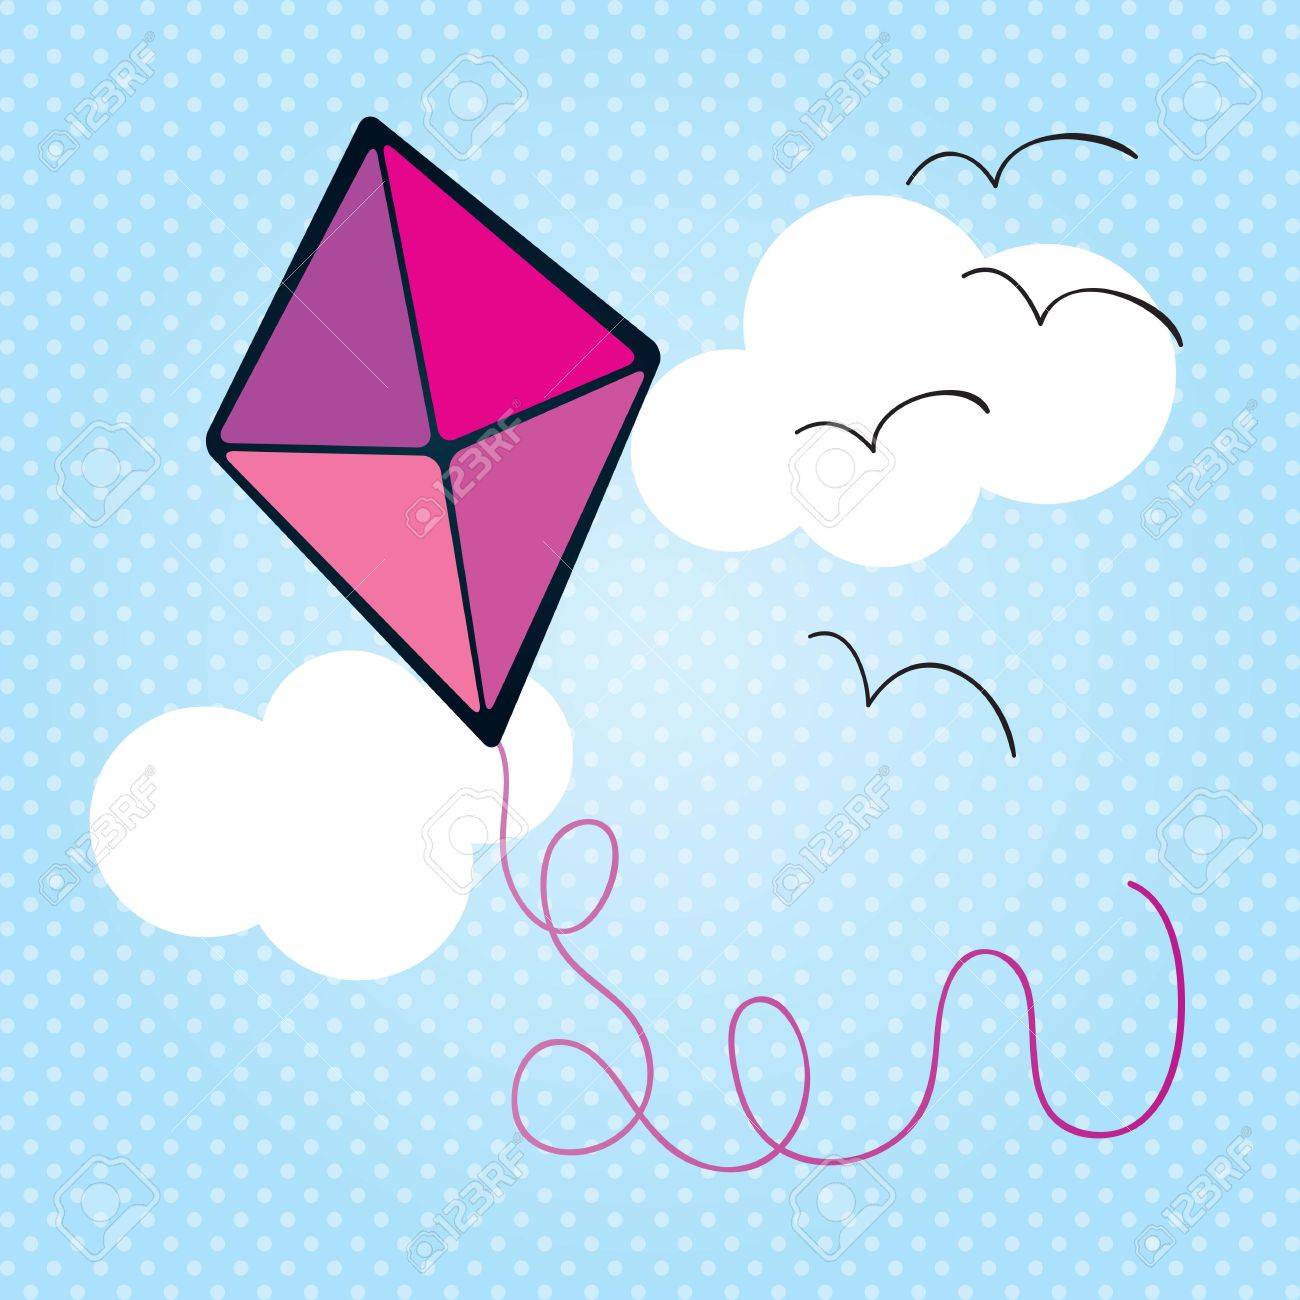 Free Kite Clipart spring, Download Free Clip Art on Owips